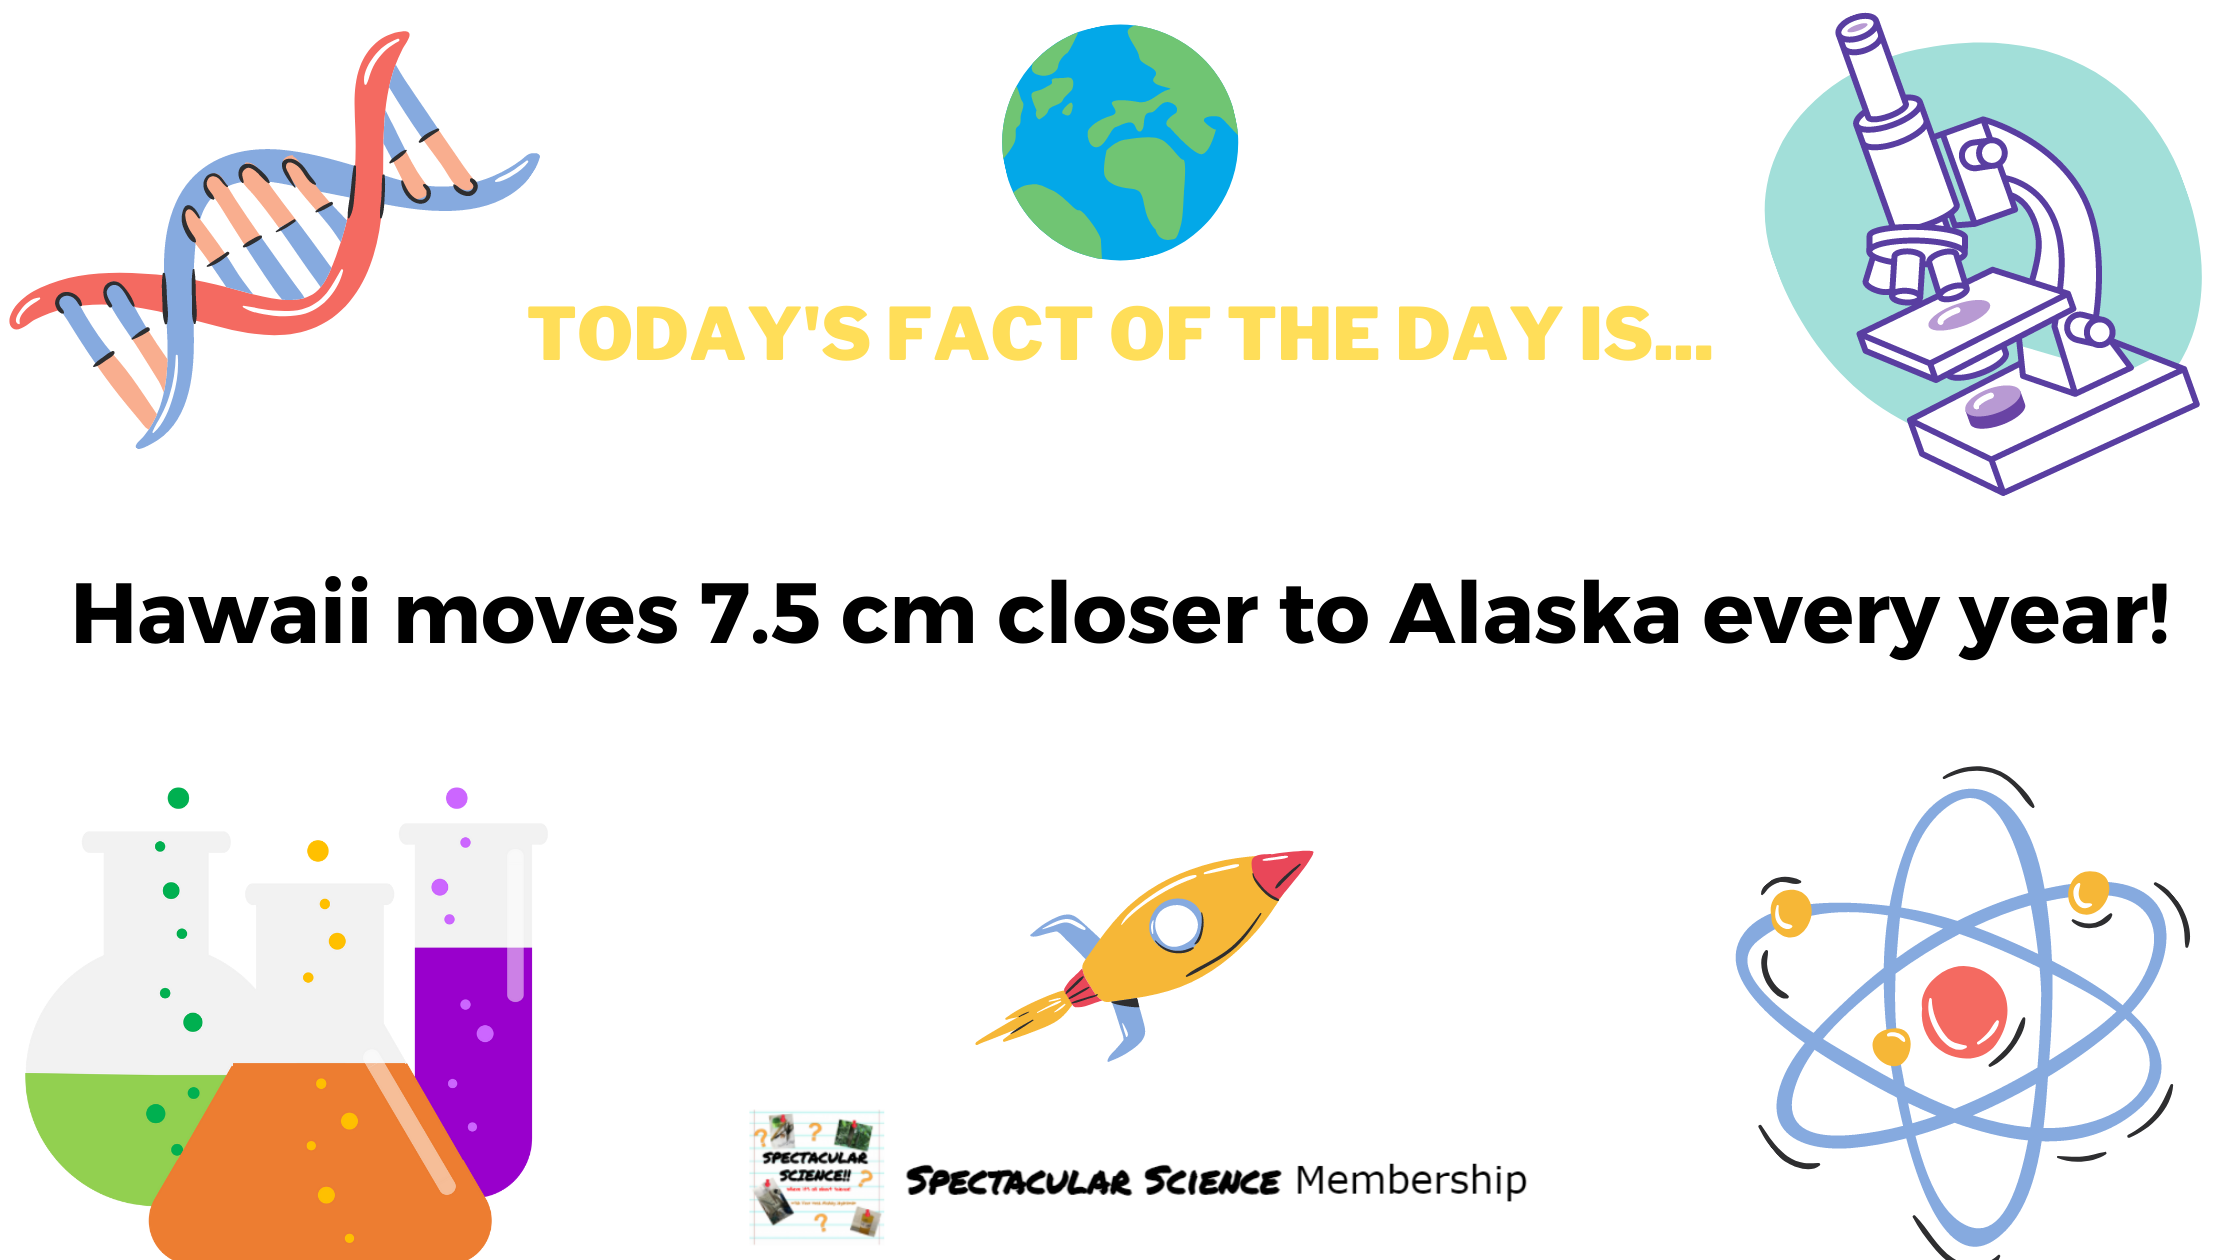 Fact of the Day Image Jan. 20th